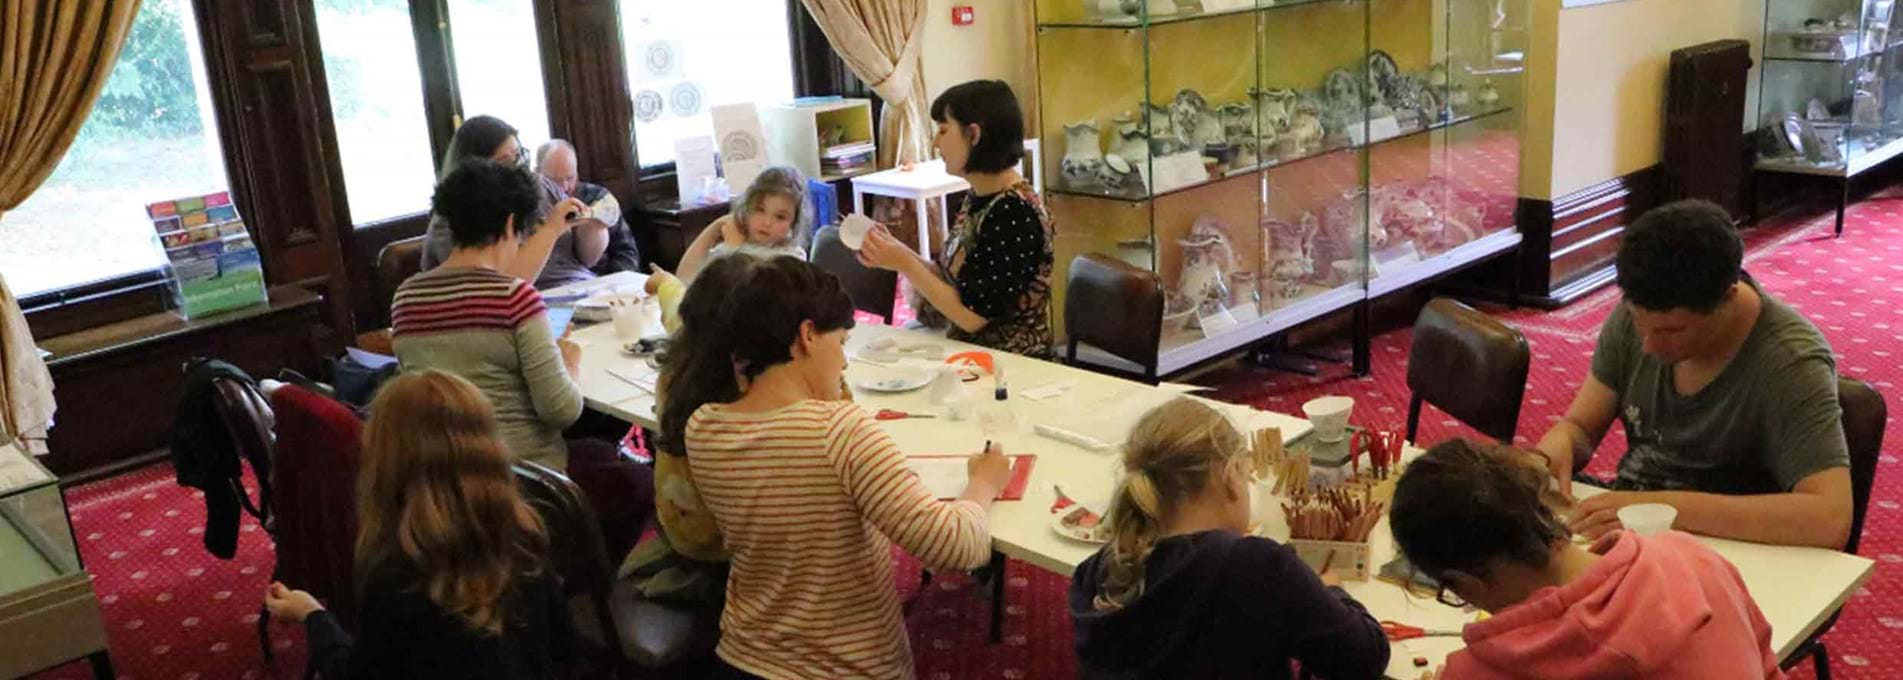 Families enjoying making paper pottery in Parc Howard Museum